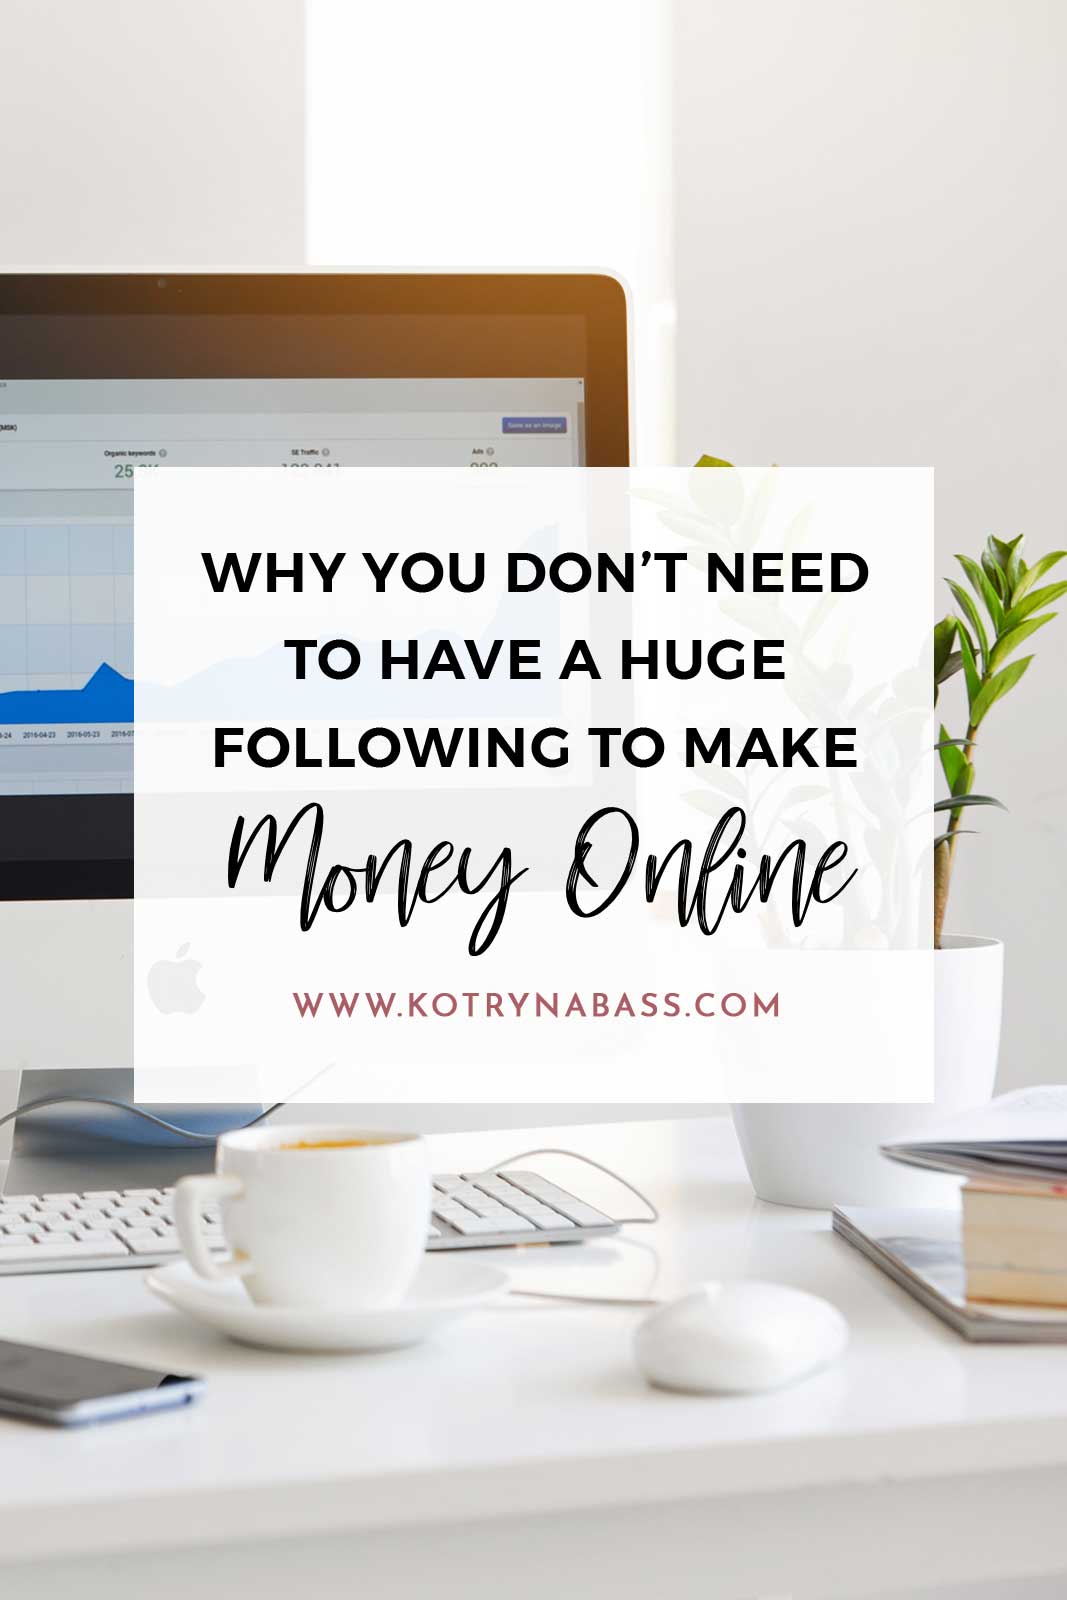 I want to break one of the most common blogging myths out there once and for all. You don't need to have a huge following to make money online. Of course, it does help, but you can easily start monetising your site from day one.